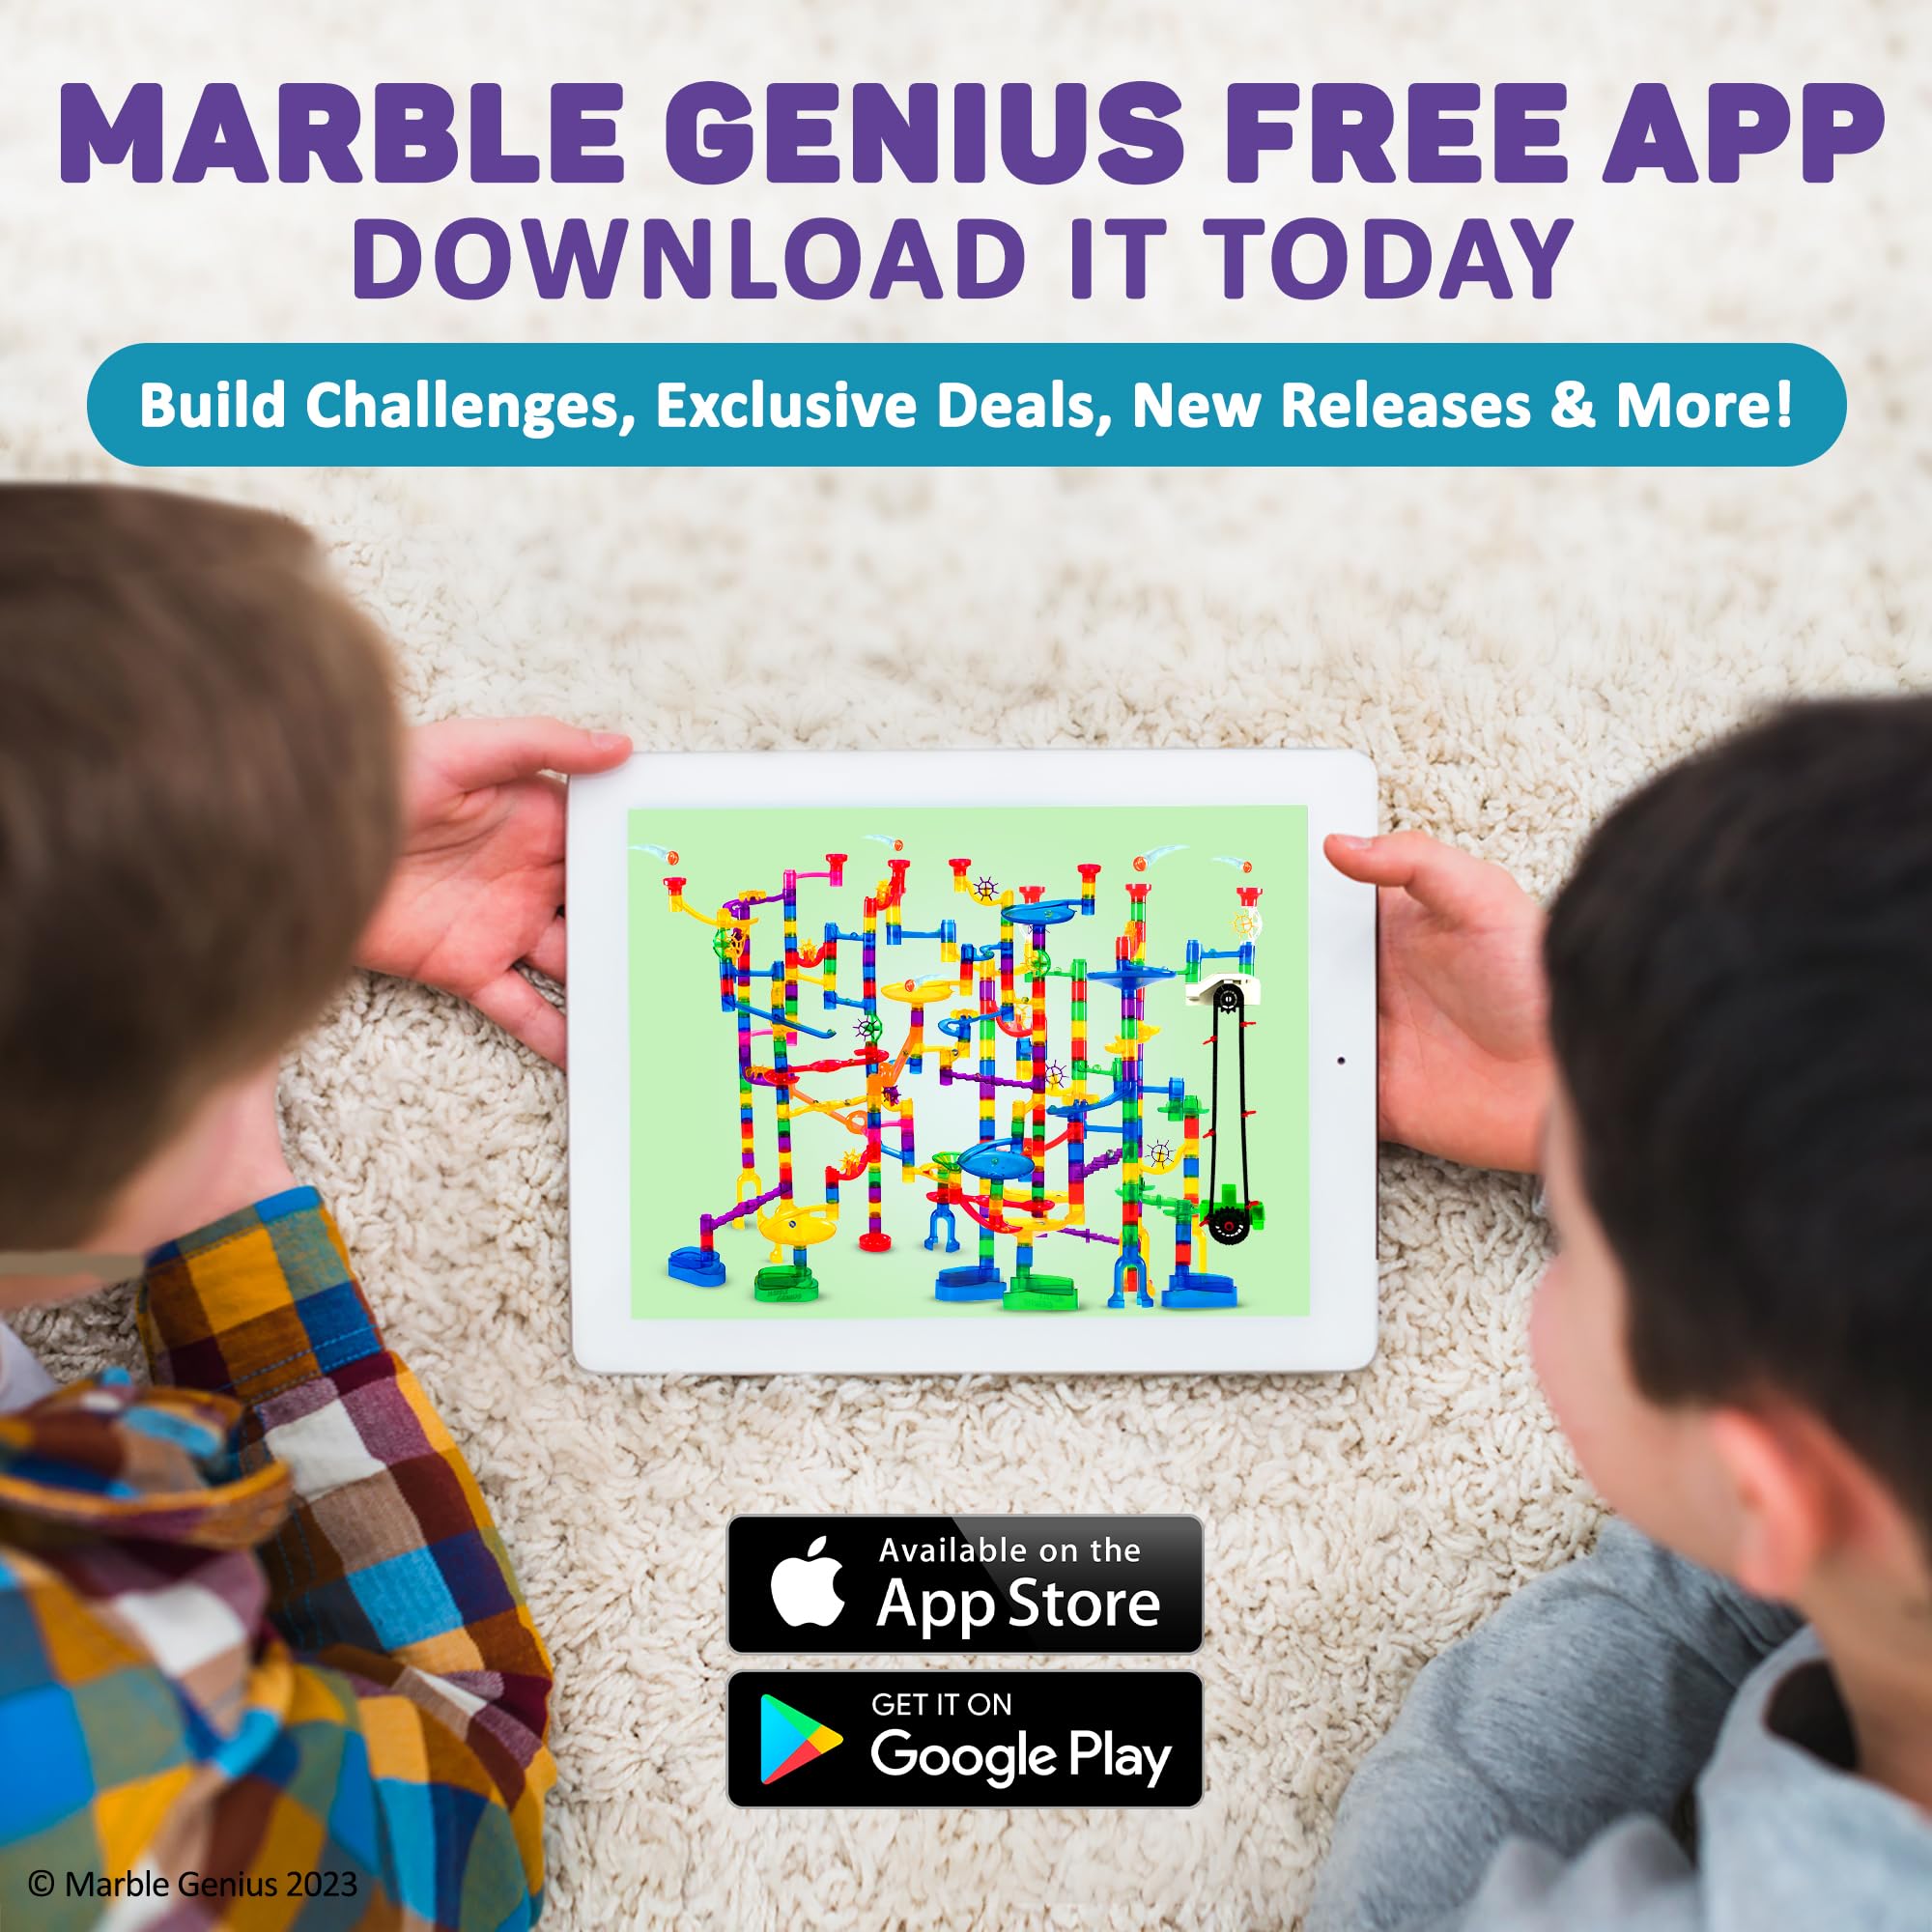 Marble Genius Bundle: Marble Racing Booster Set (10 Pieces), Automatic Chain Lift, Marble Run Pipes & Spheres Accessory (10 Pieces), Experience The Thrills of Marble Racing